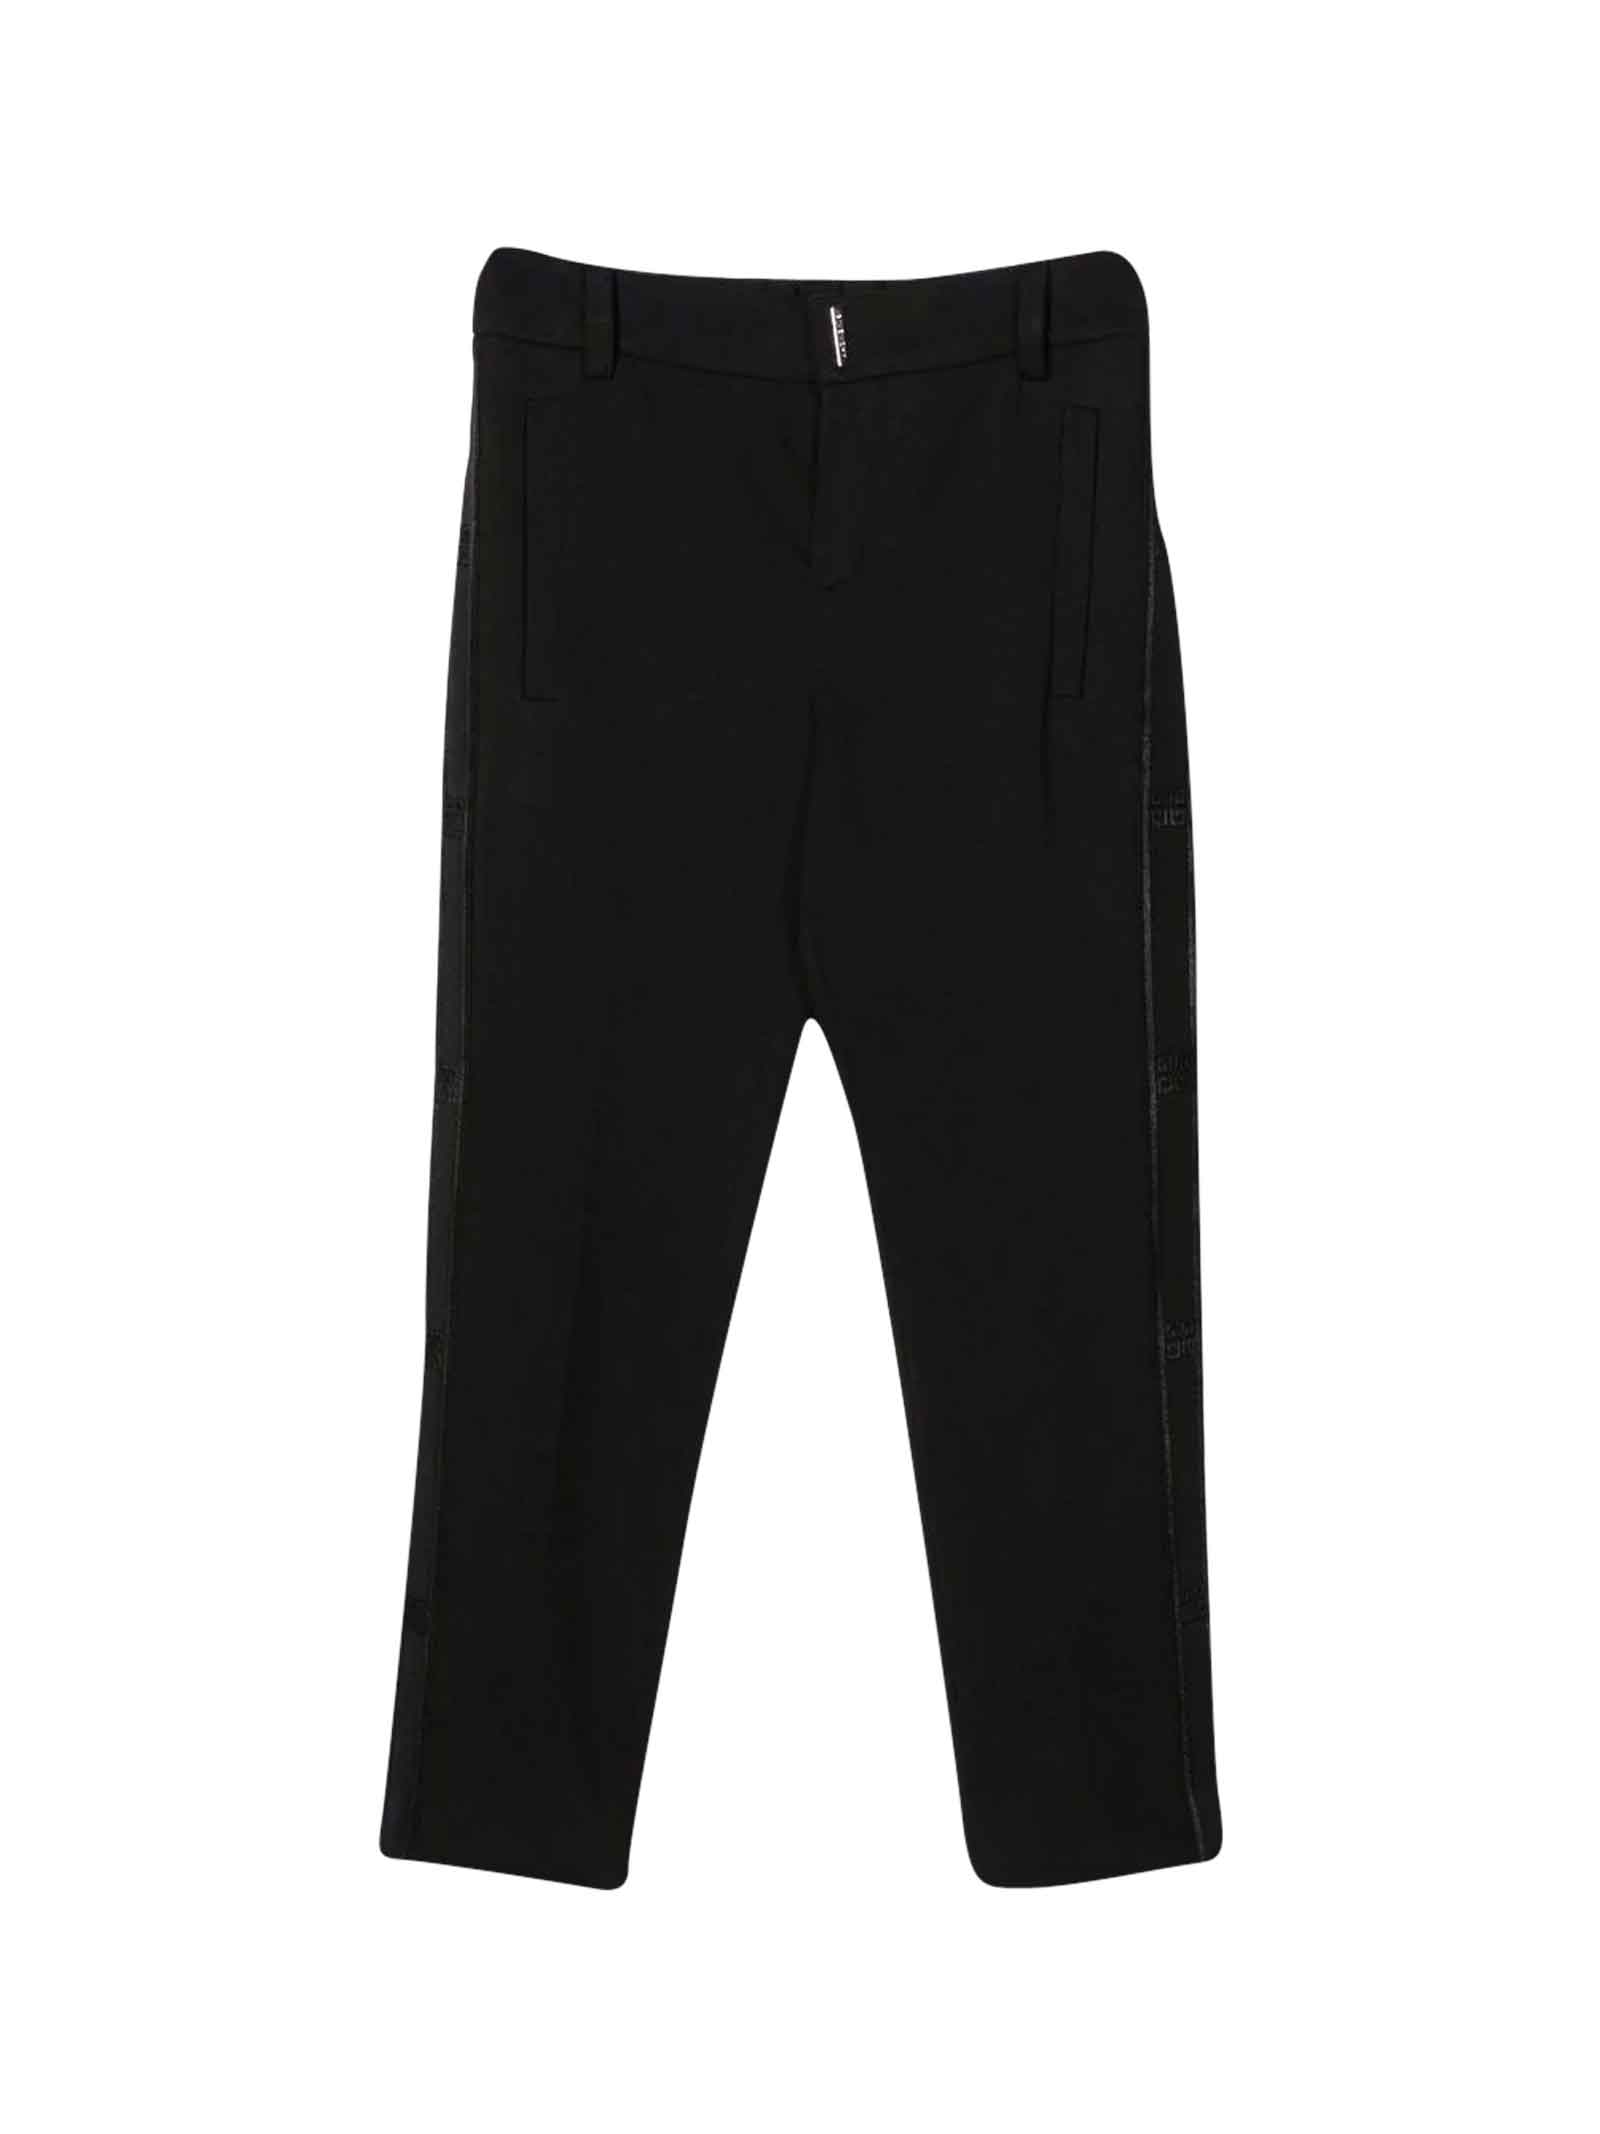 Givenchy Black Boy Trousers